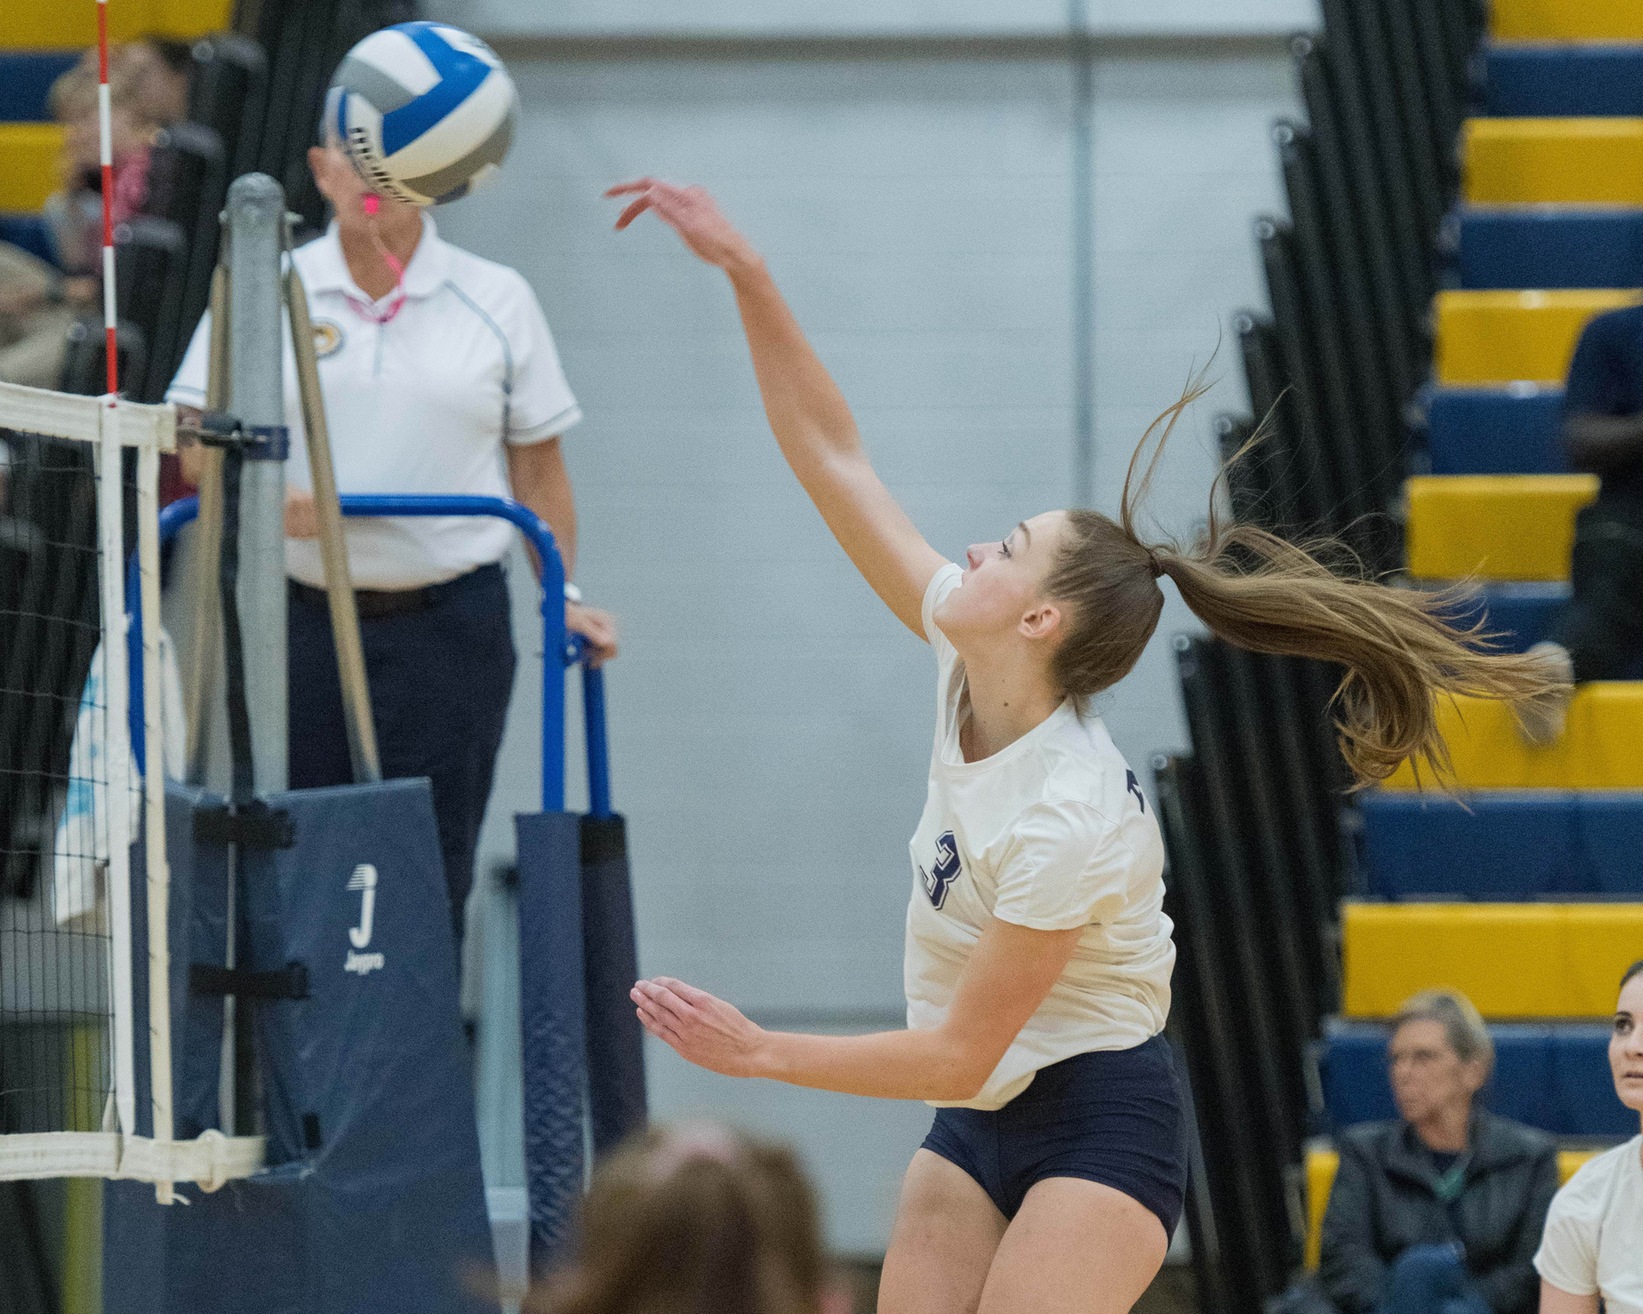 Scattergood leads MCLA Volleyball to key road win over Worcester State 3-0